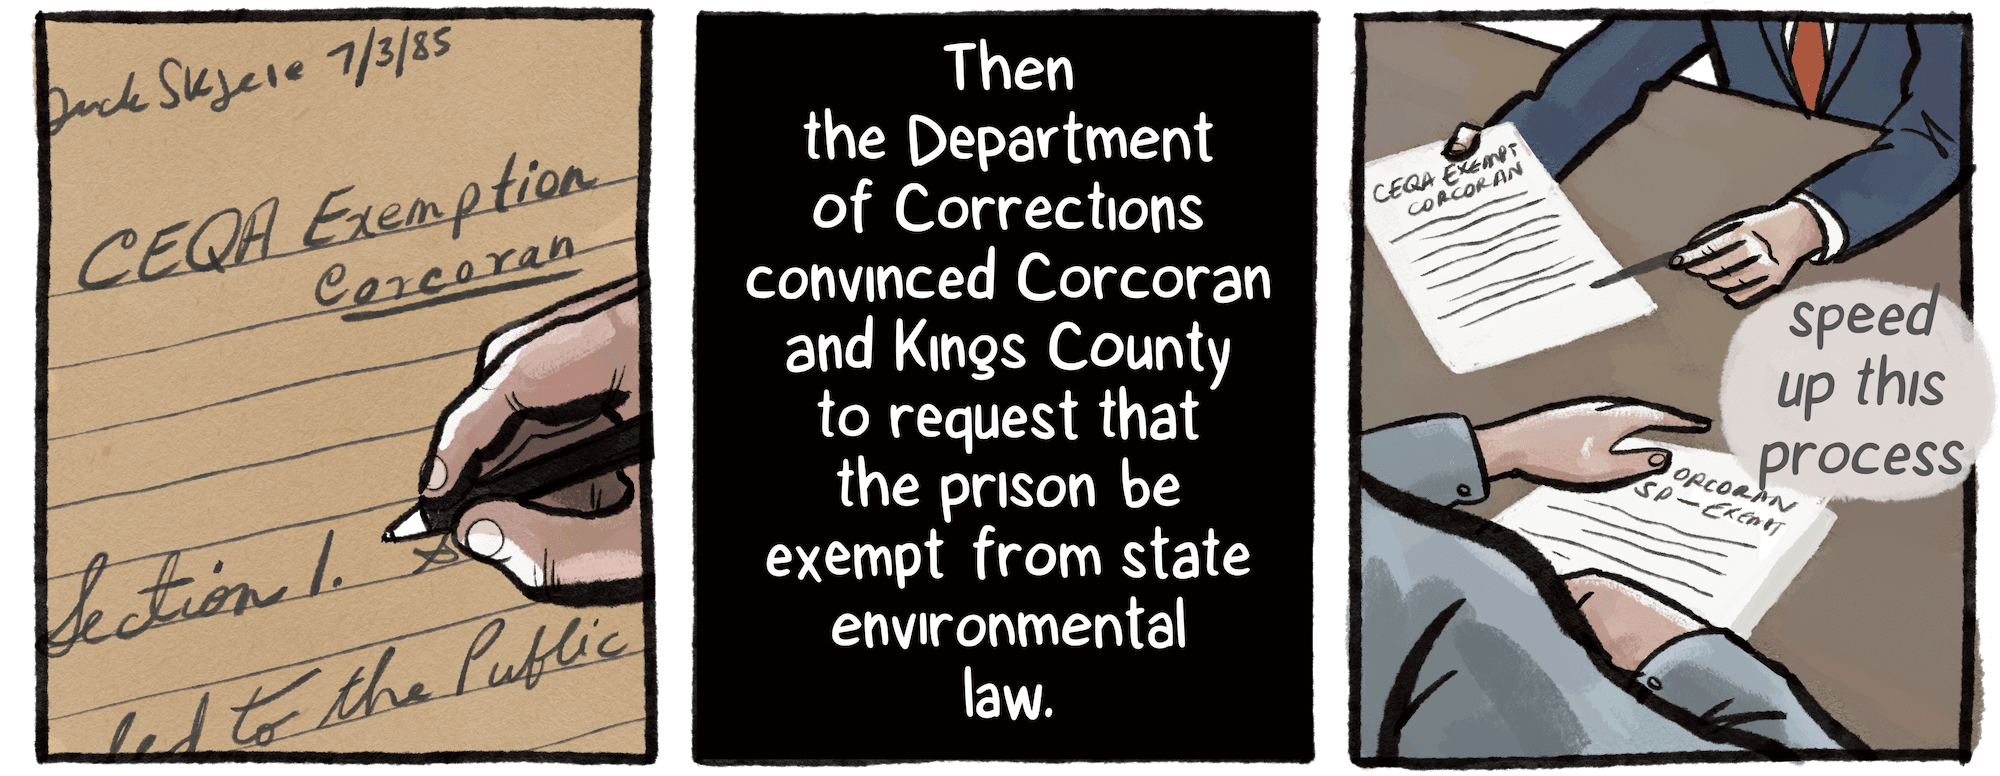 Then, the Department of Corrections convinced Corcoran and Kings County to request that the prison be exempt from state environmental law. A hand is seen taking notes on a document, and a man shows paperwork to another man while saying, “speed up this process.”